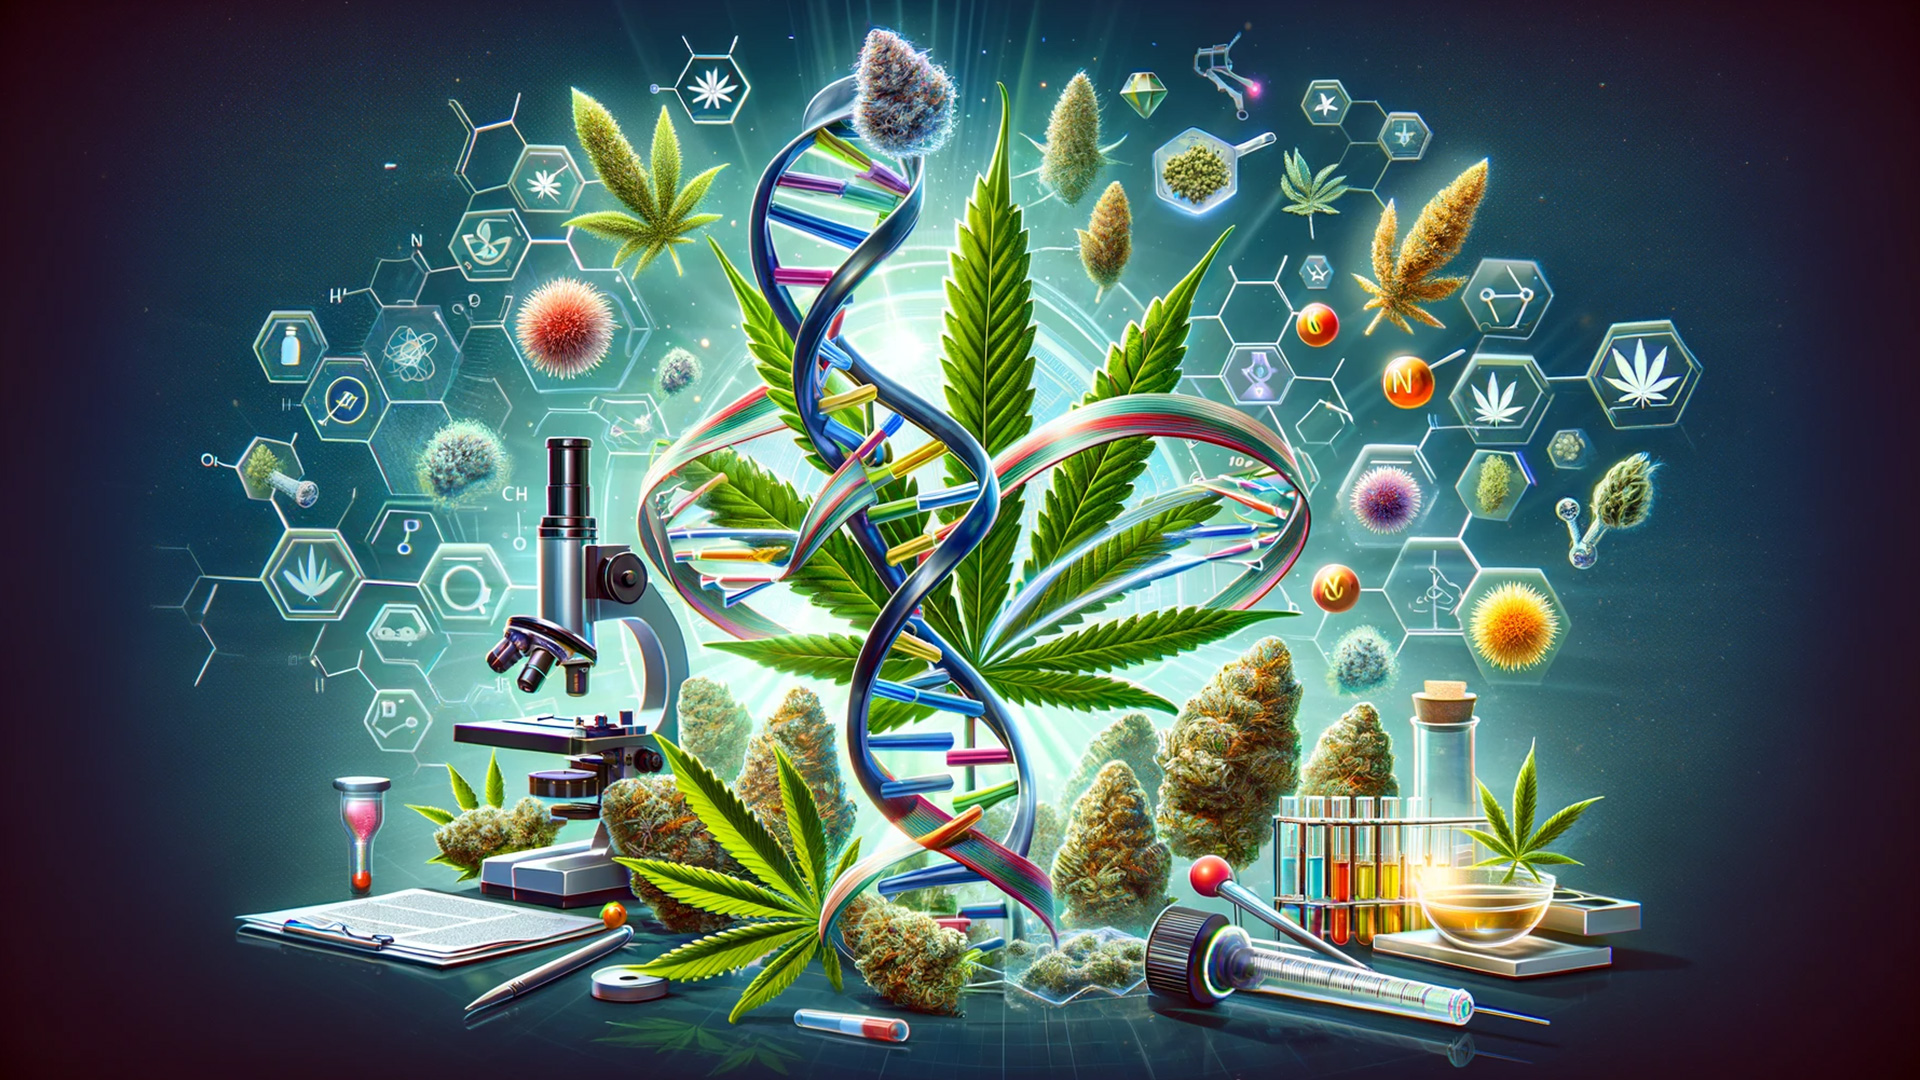 Illustration of DNA helix intertwined with cannabis leaves and a microscope, symbolizing the innovation and diversity in cannabis genetics